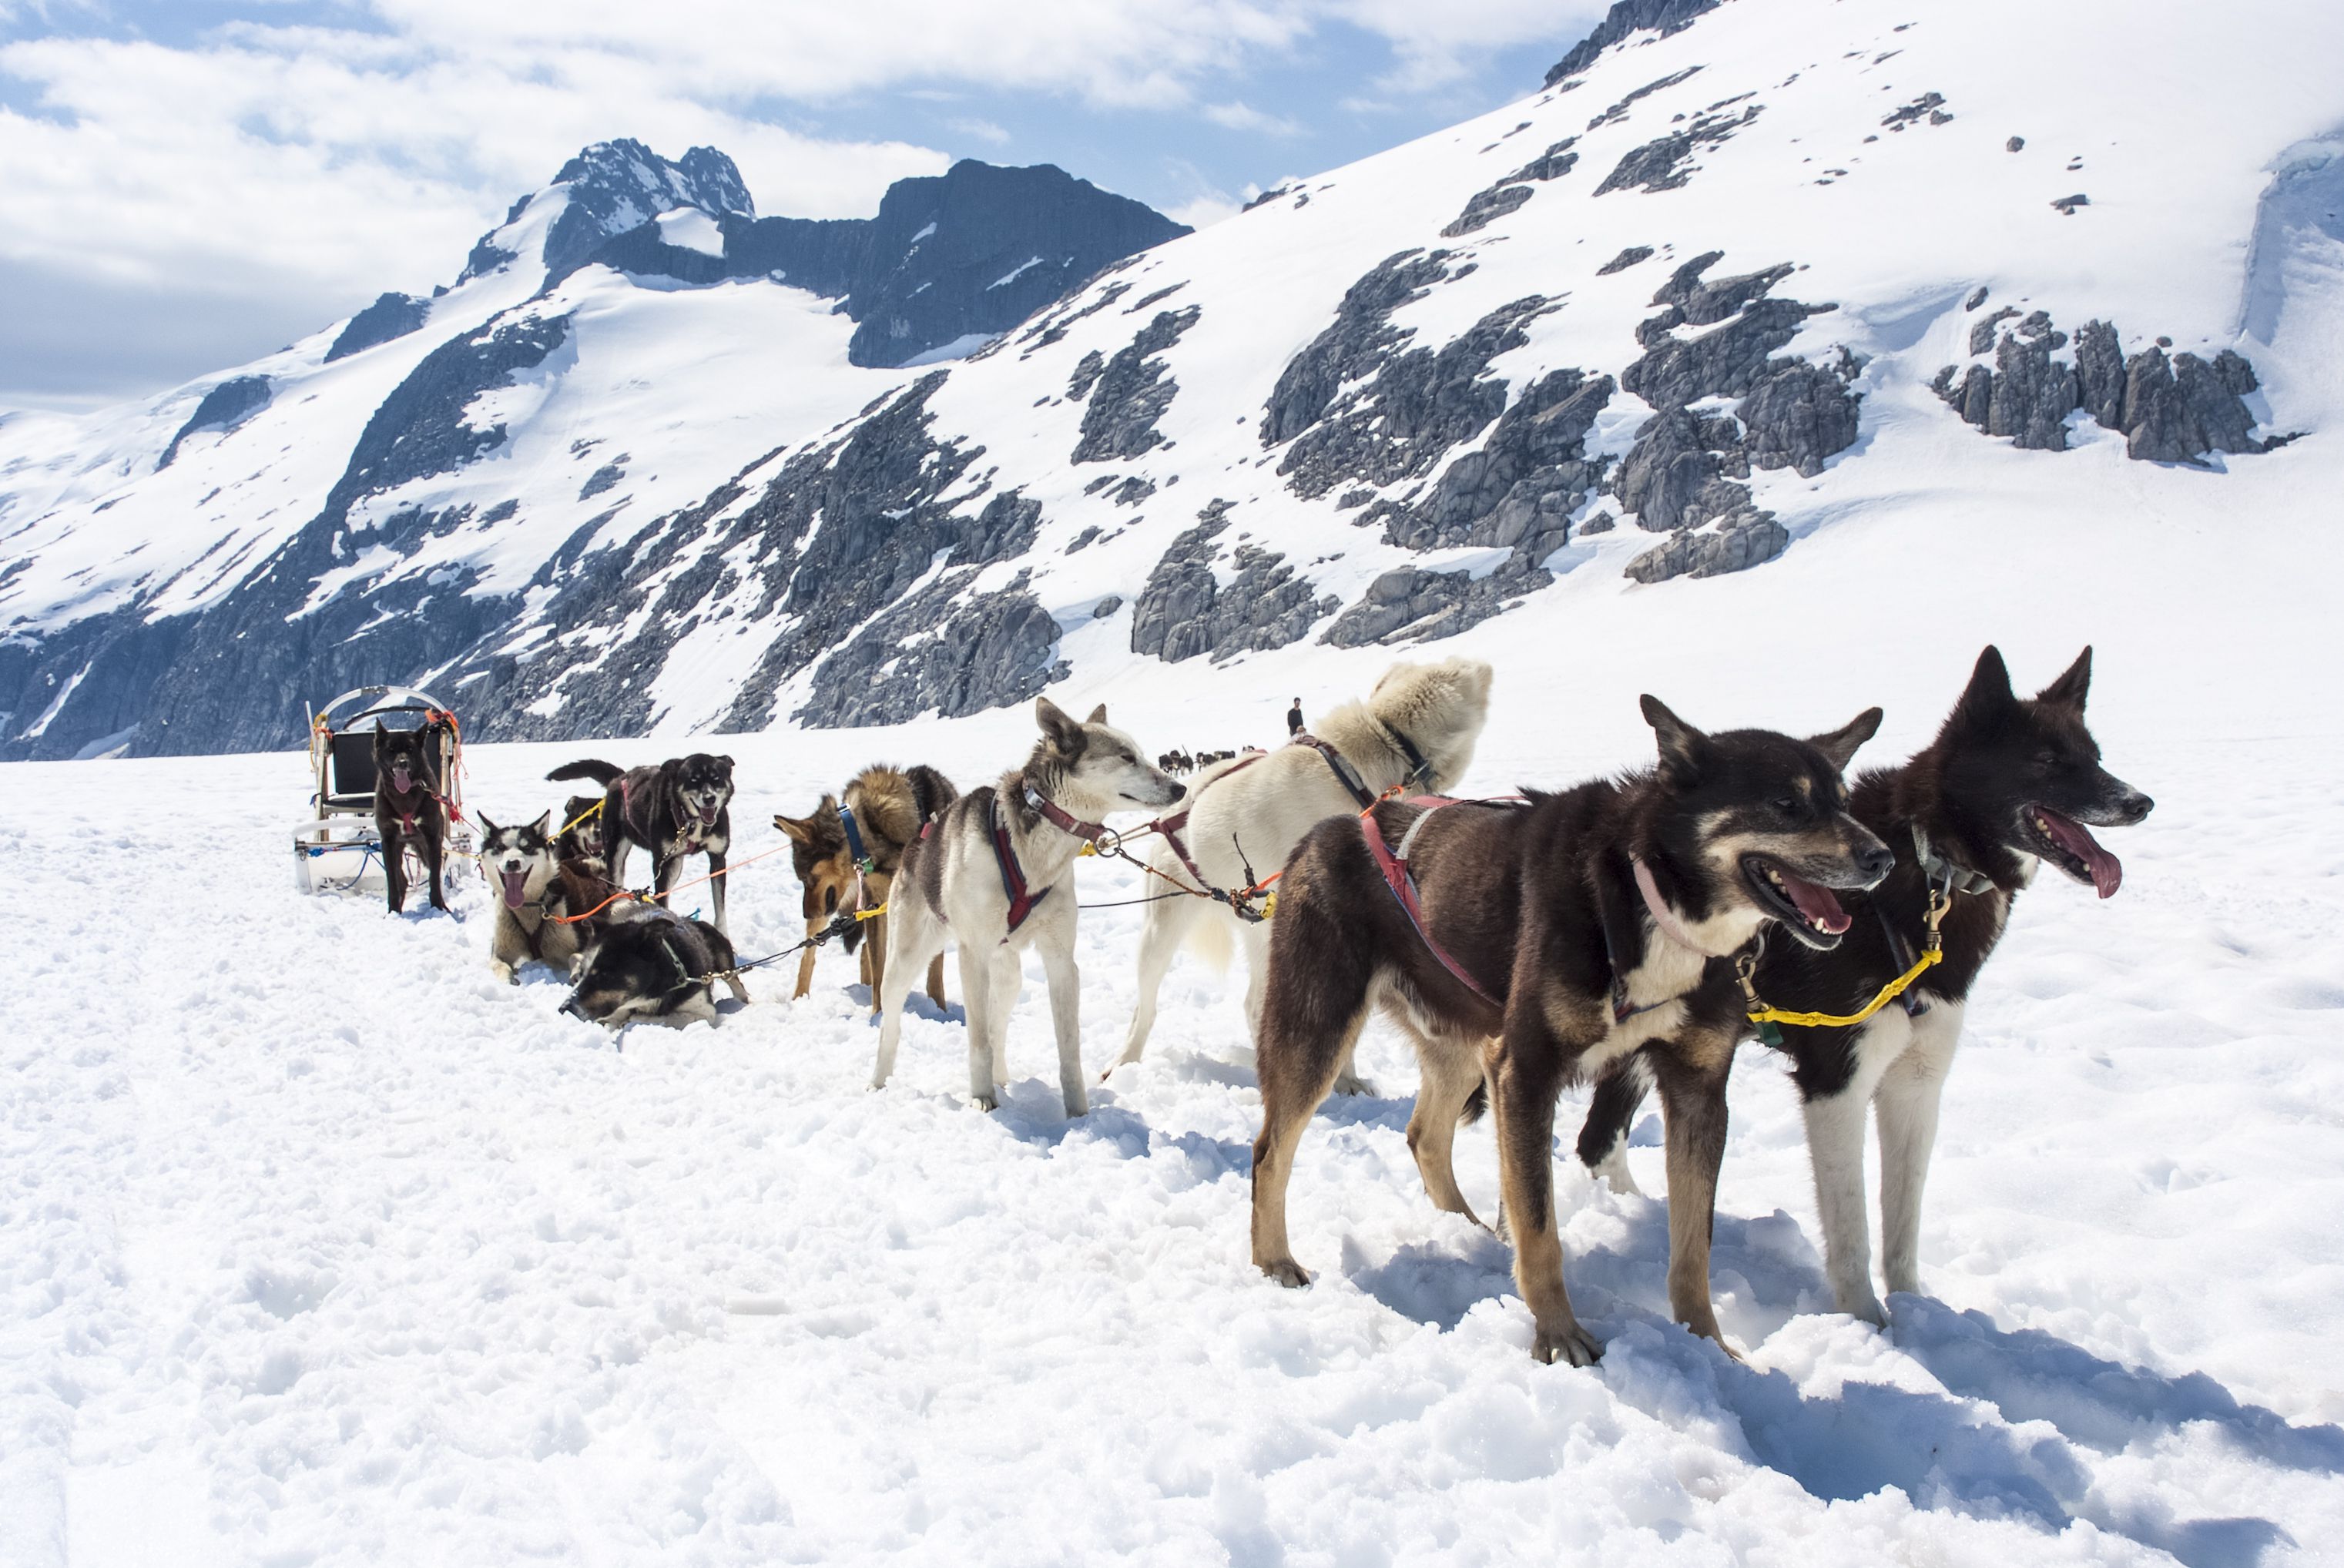 <p>Dog-sled teams are a symbol of the region and an important part of the area's history, and still used in Alaska. You can learn about the sled dogs at the Denali Kennels during the summer or winter. The kennels are located within the <a href="https://www.nps.gov/dena/index.htm">Denali National Park</a>, which charges a $15 entrance fee for visitors 16 and older.</p>